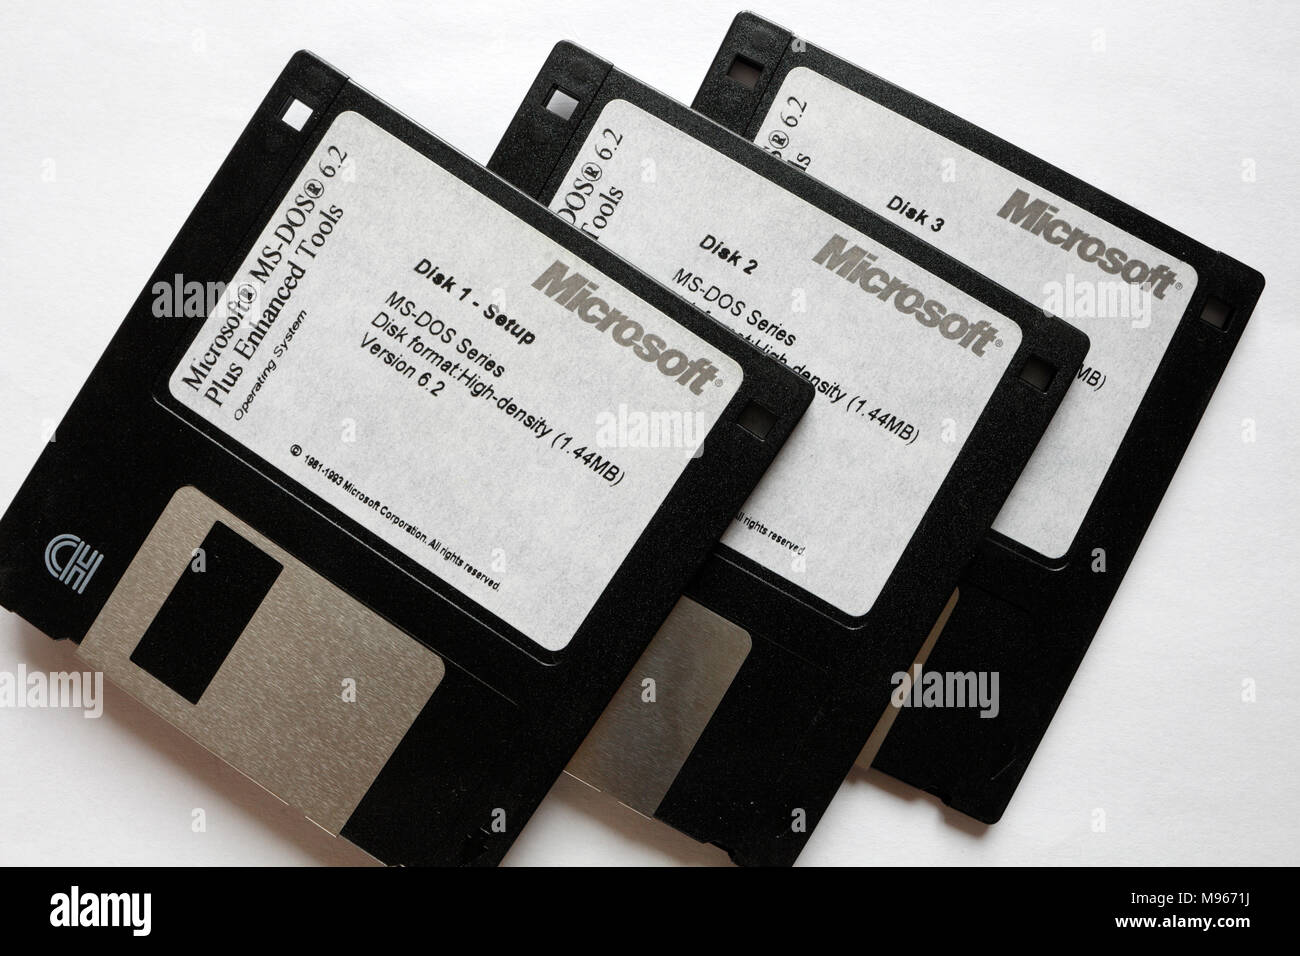 Microsoft MS-DOS 6 Full Version Operating System on 3.5/" Floppy Disks